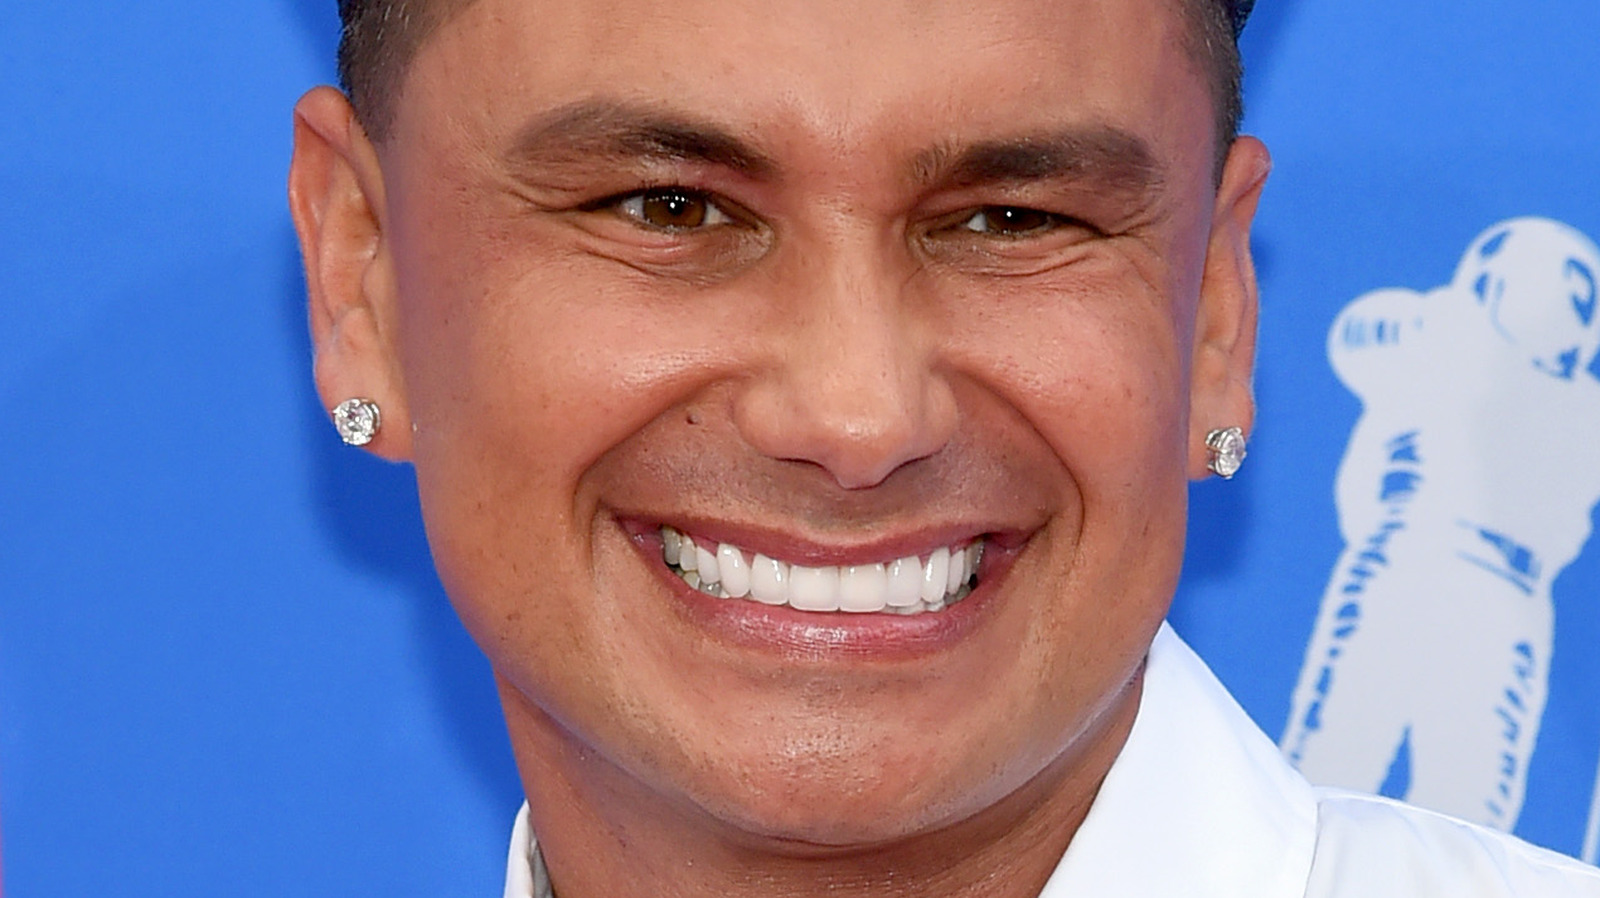 Did You Know Pauly D Had A Daughter? —Details On Daddy's Little Girl